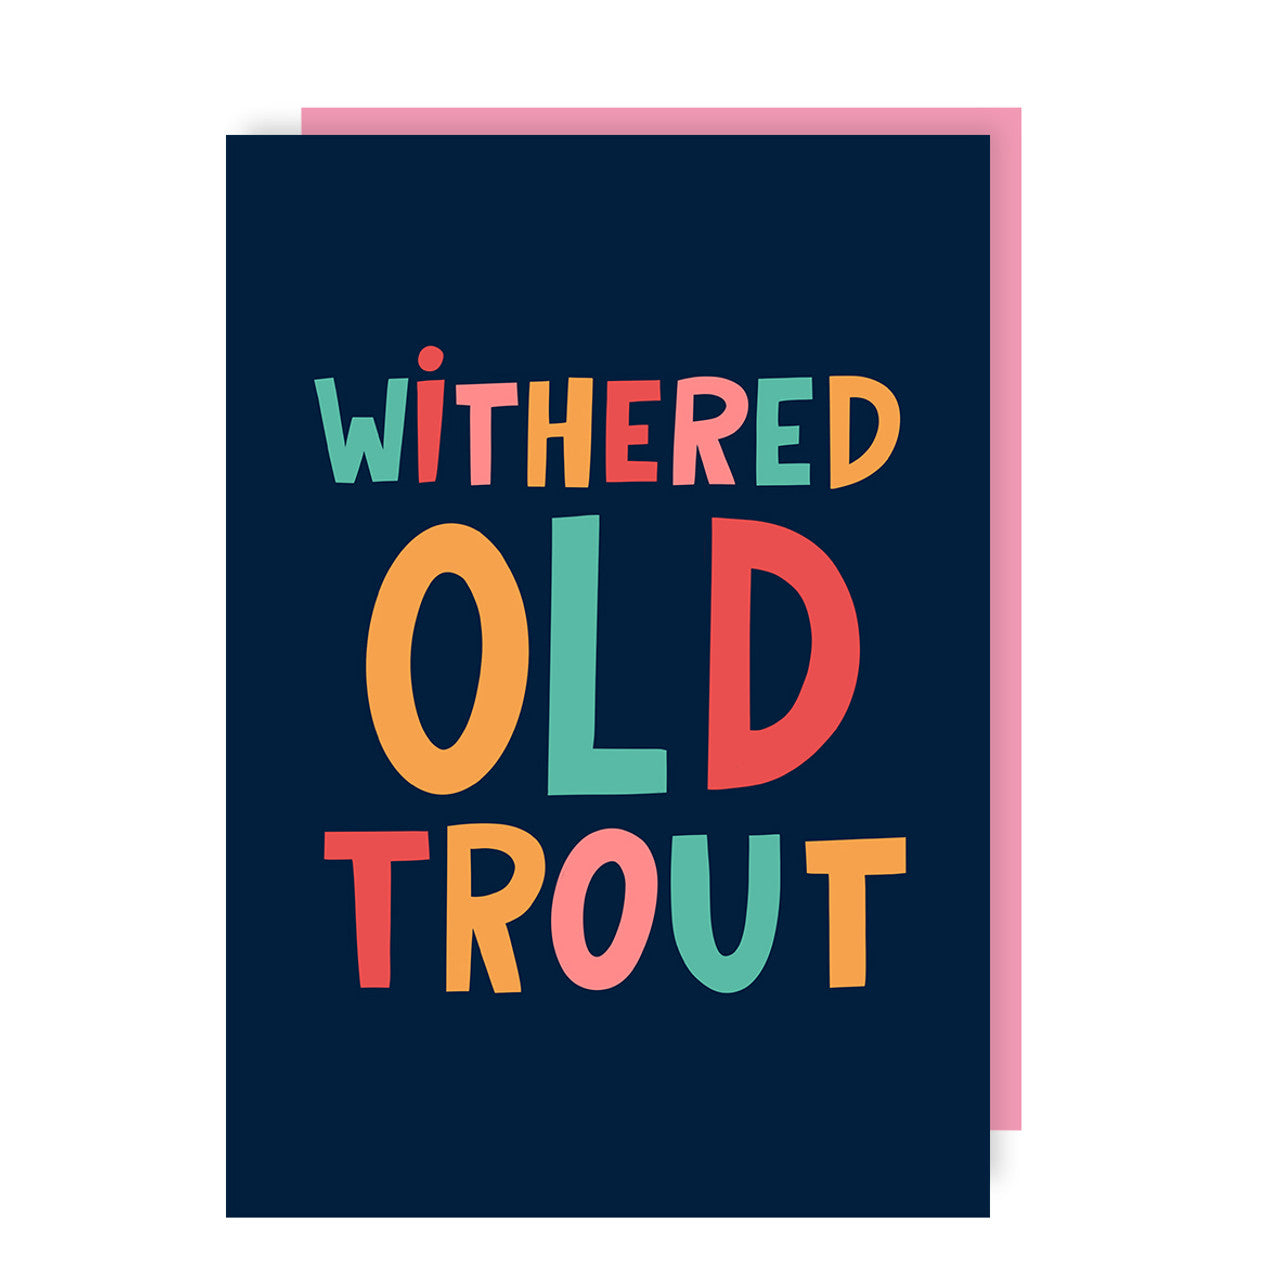 Birthday Card text reads "Withered Old Trout"